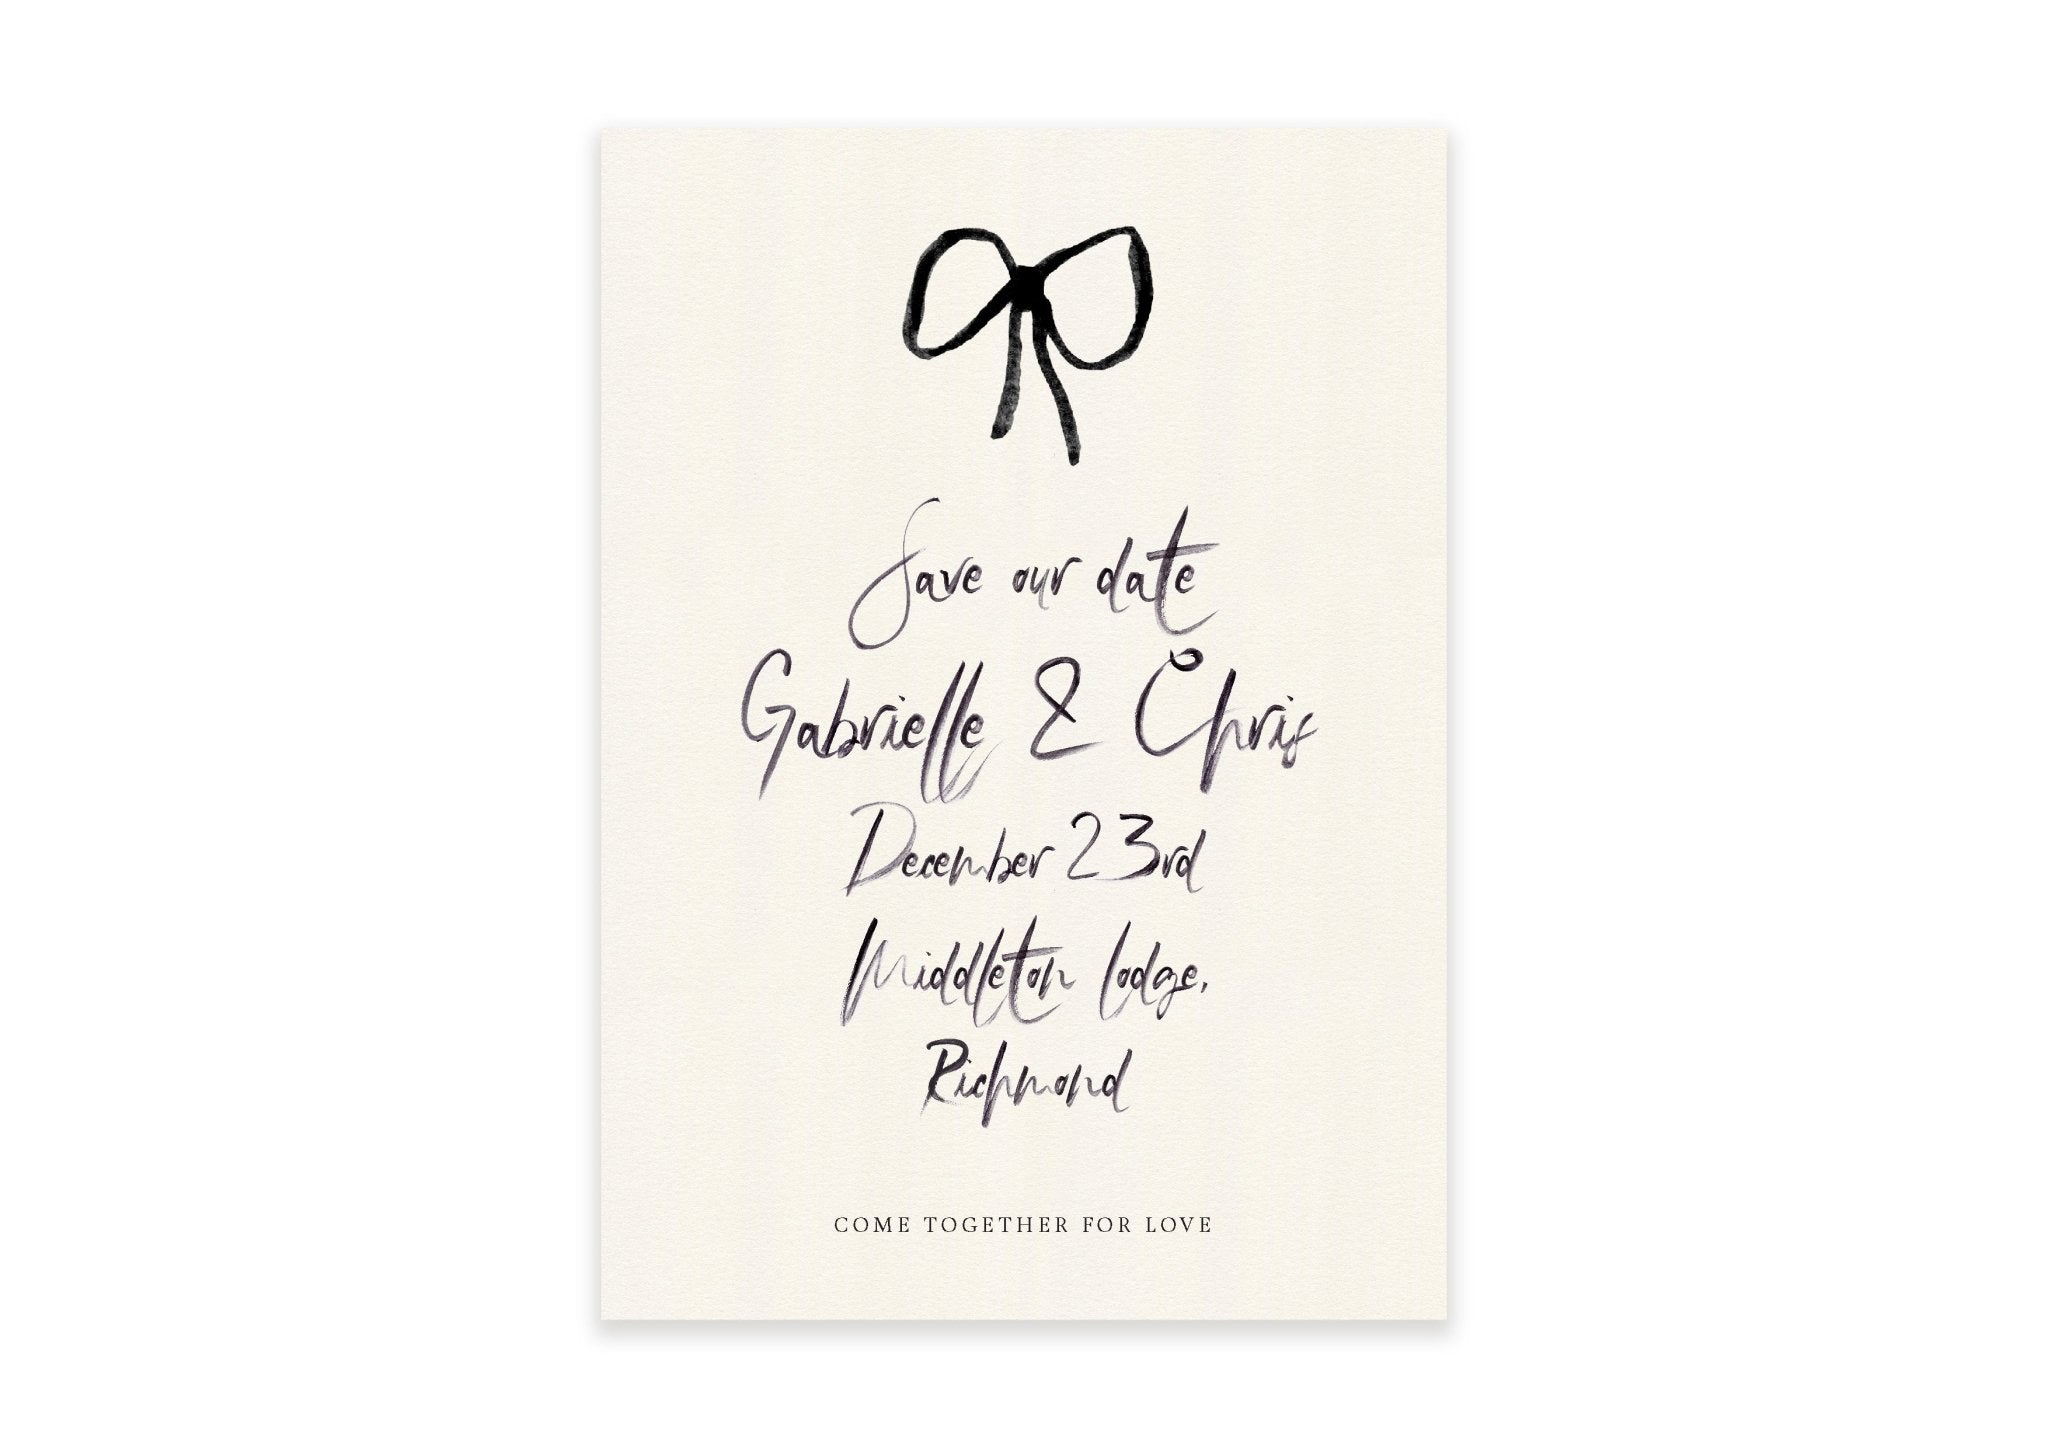 Set Gabrielle - Digital Save The Date - Ten Story Stationery